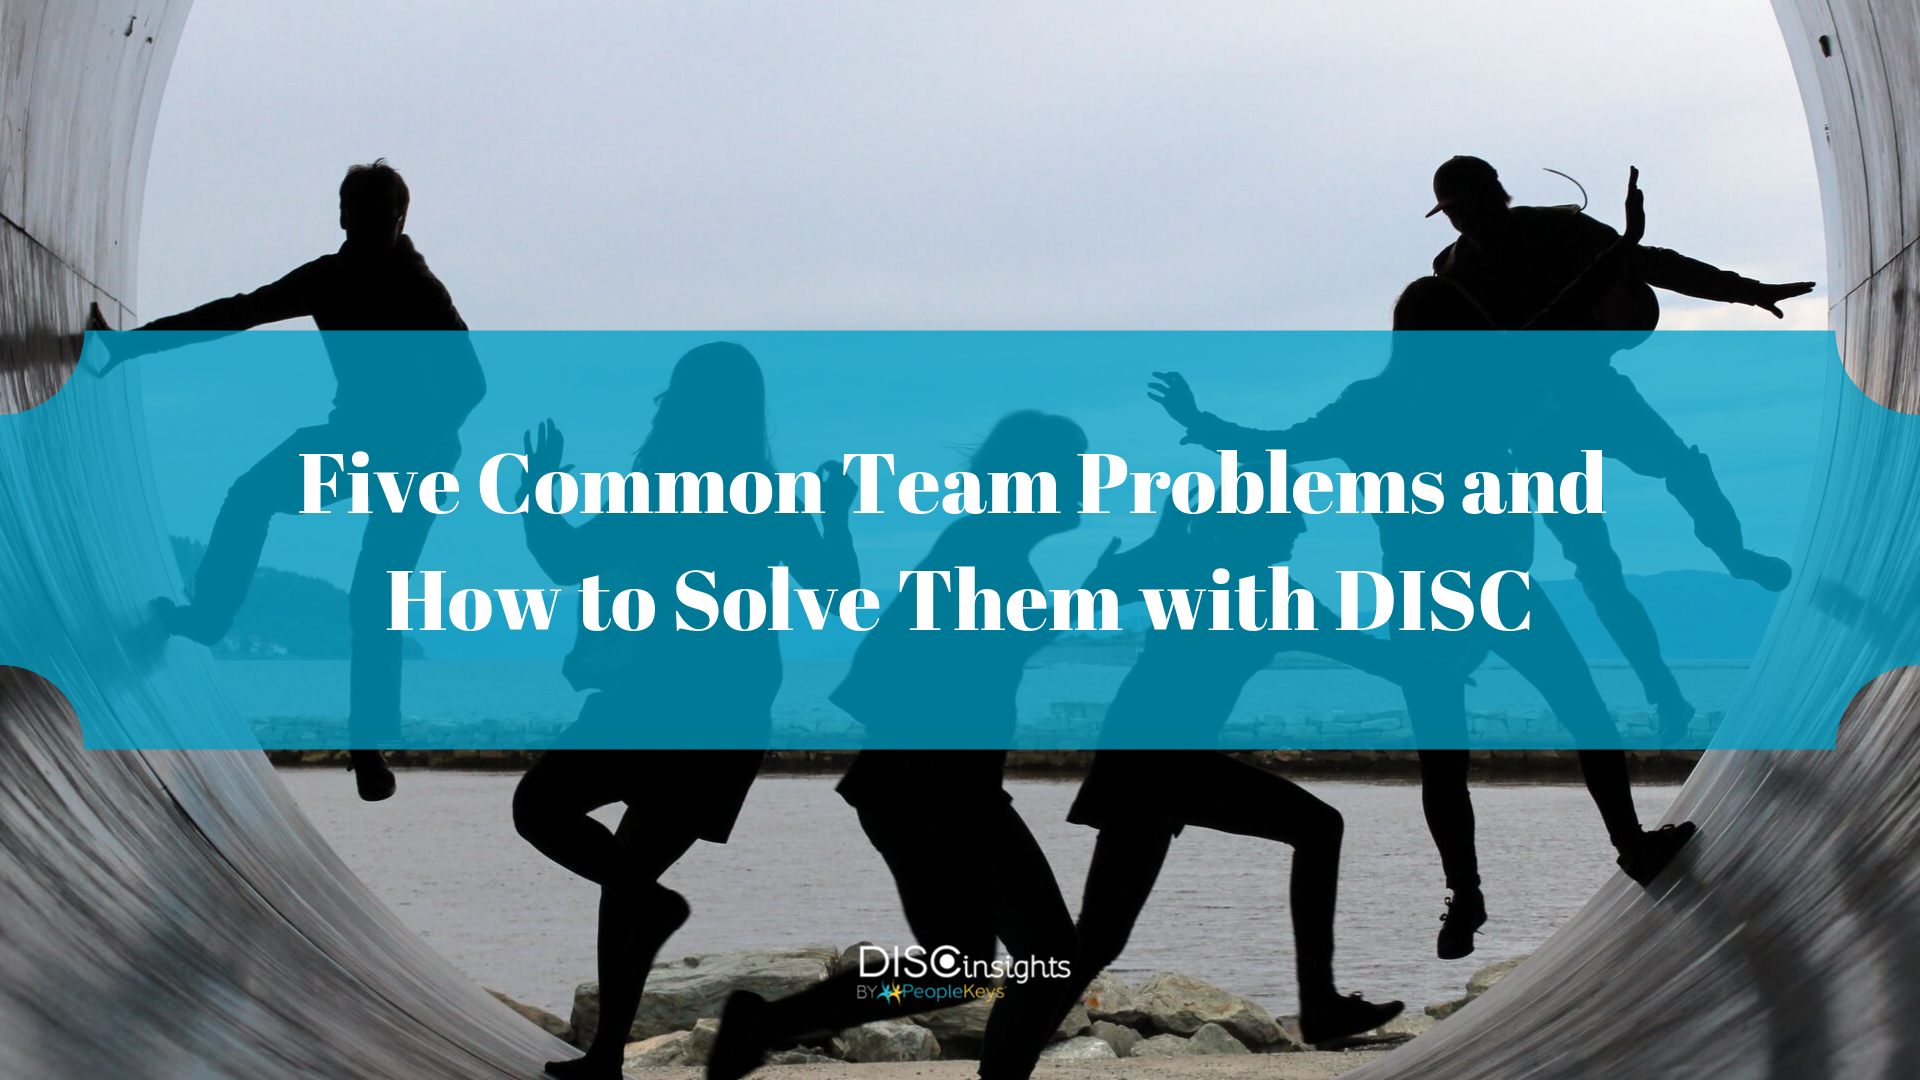 Five Common Team Problems and How to Solve Them with DISC